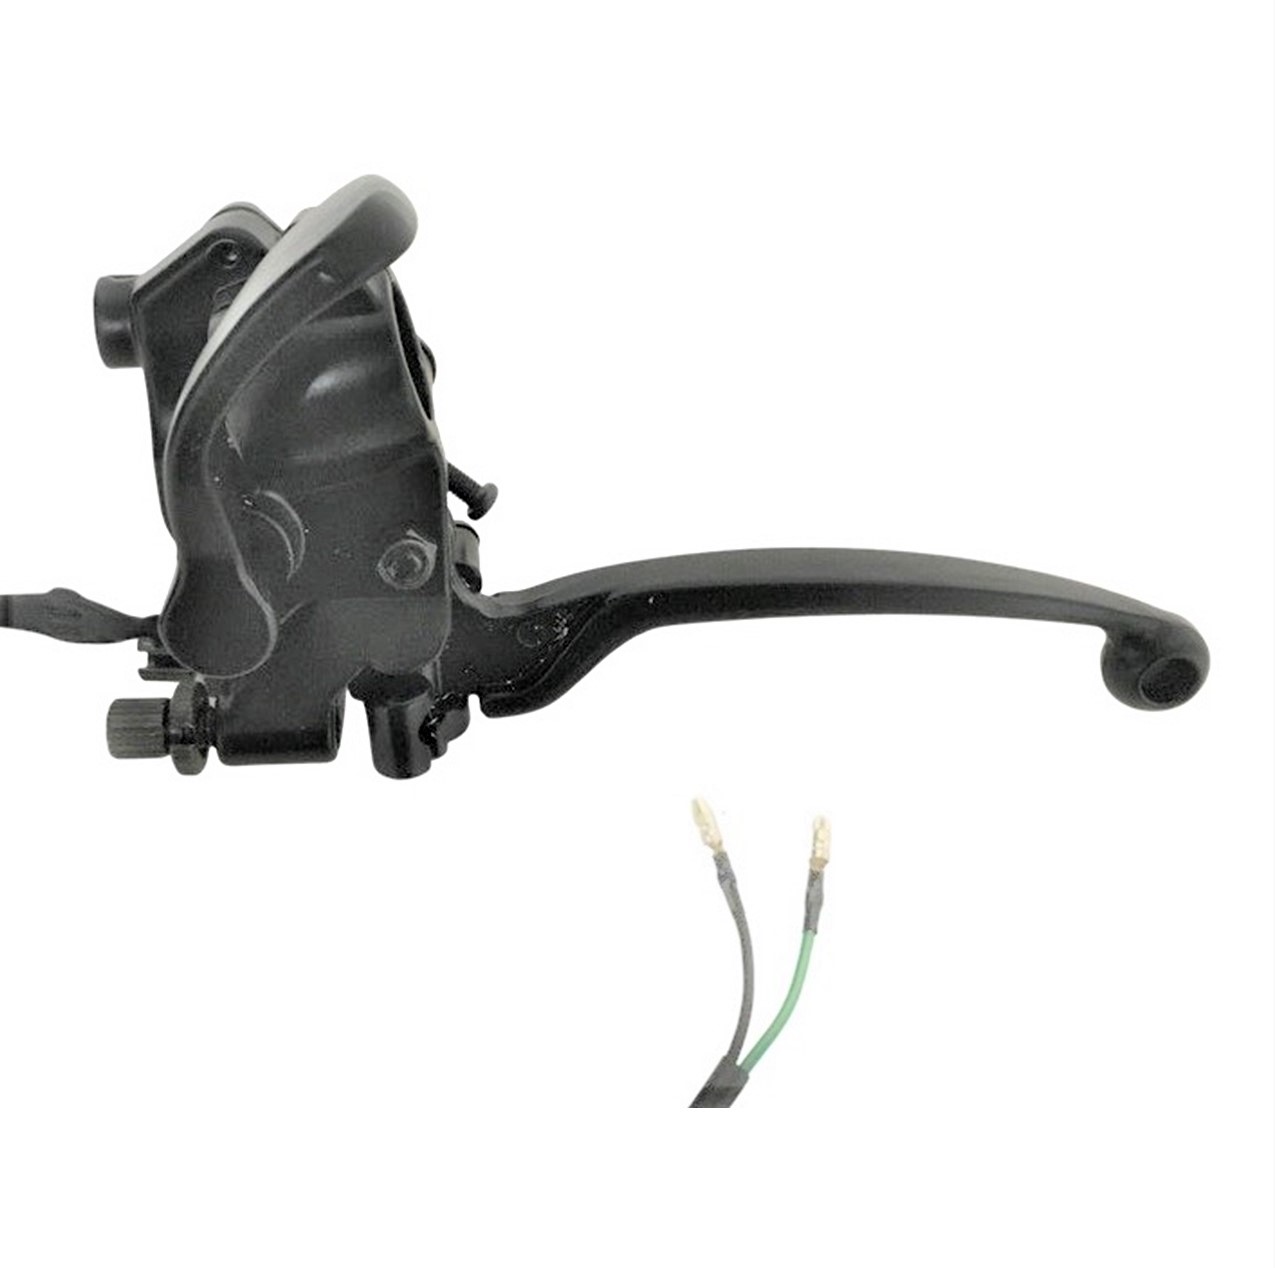 ATV Throttle ASSY Fits Most 50-250cc ATVs with Right Hande Double Front Brake Cables.